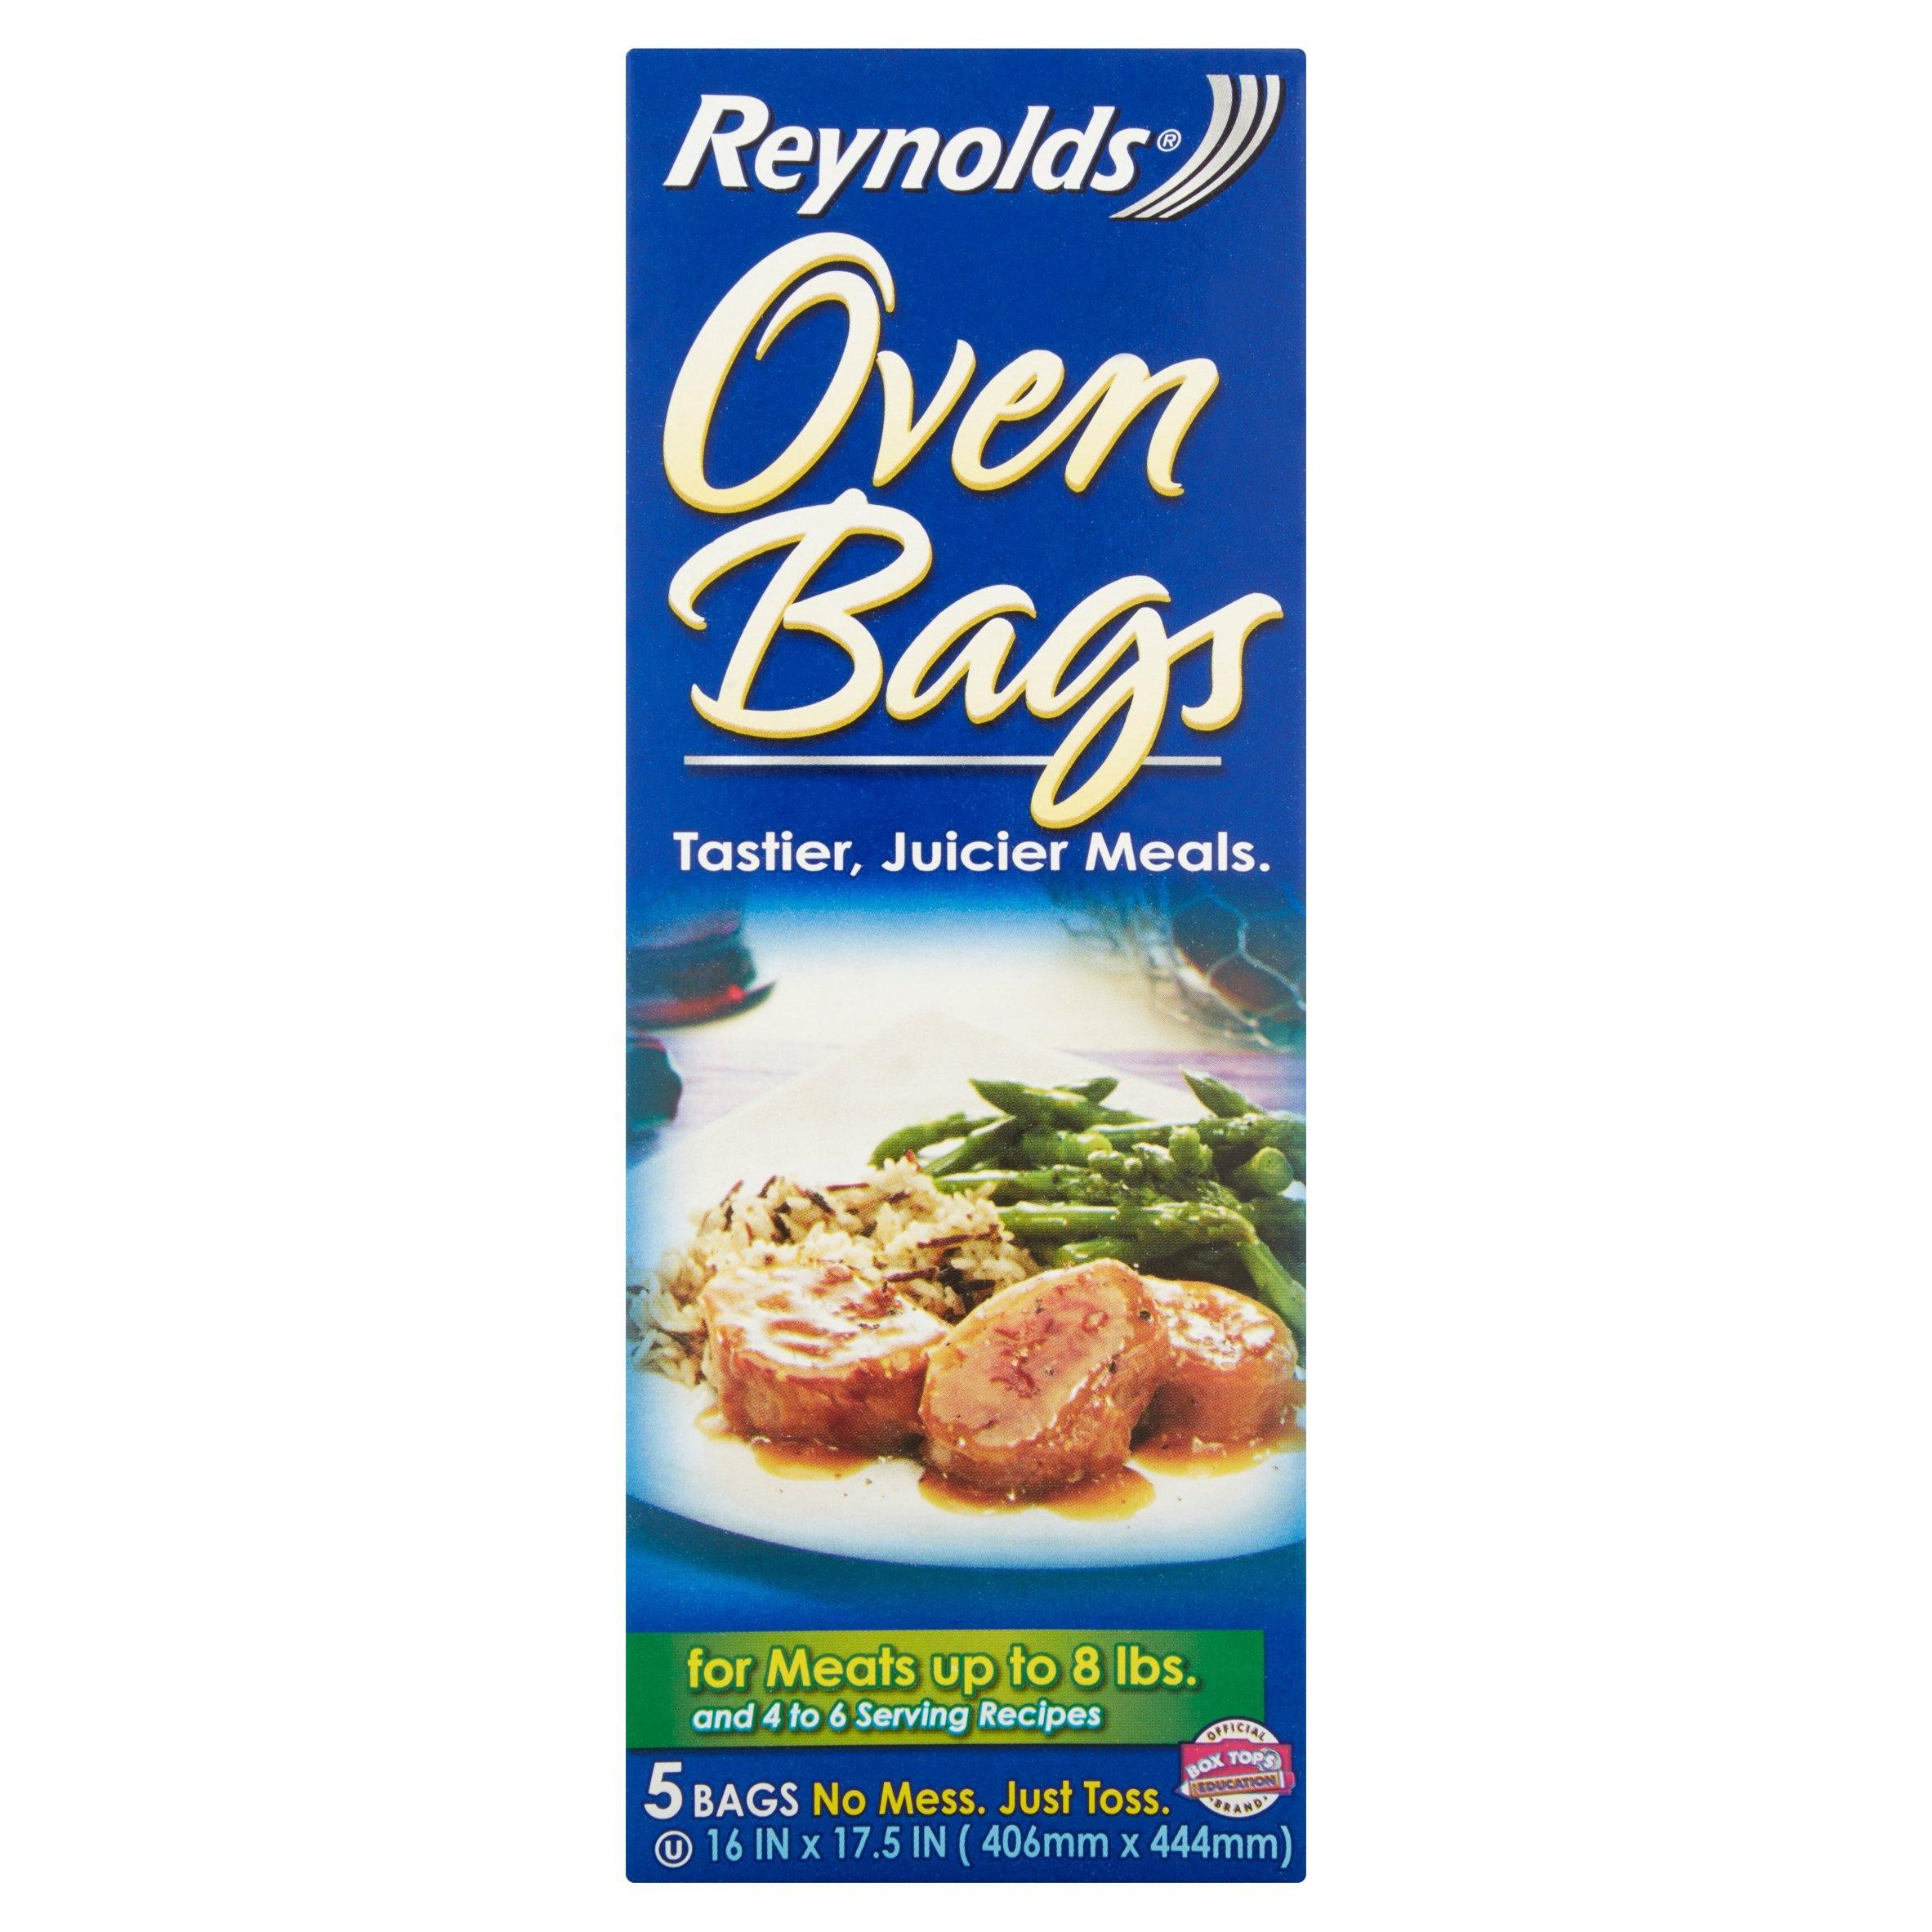 Reynolds Kitchens Large Oven Bags